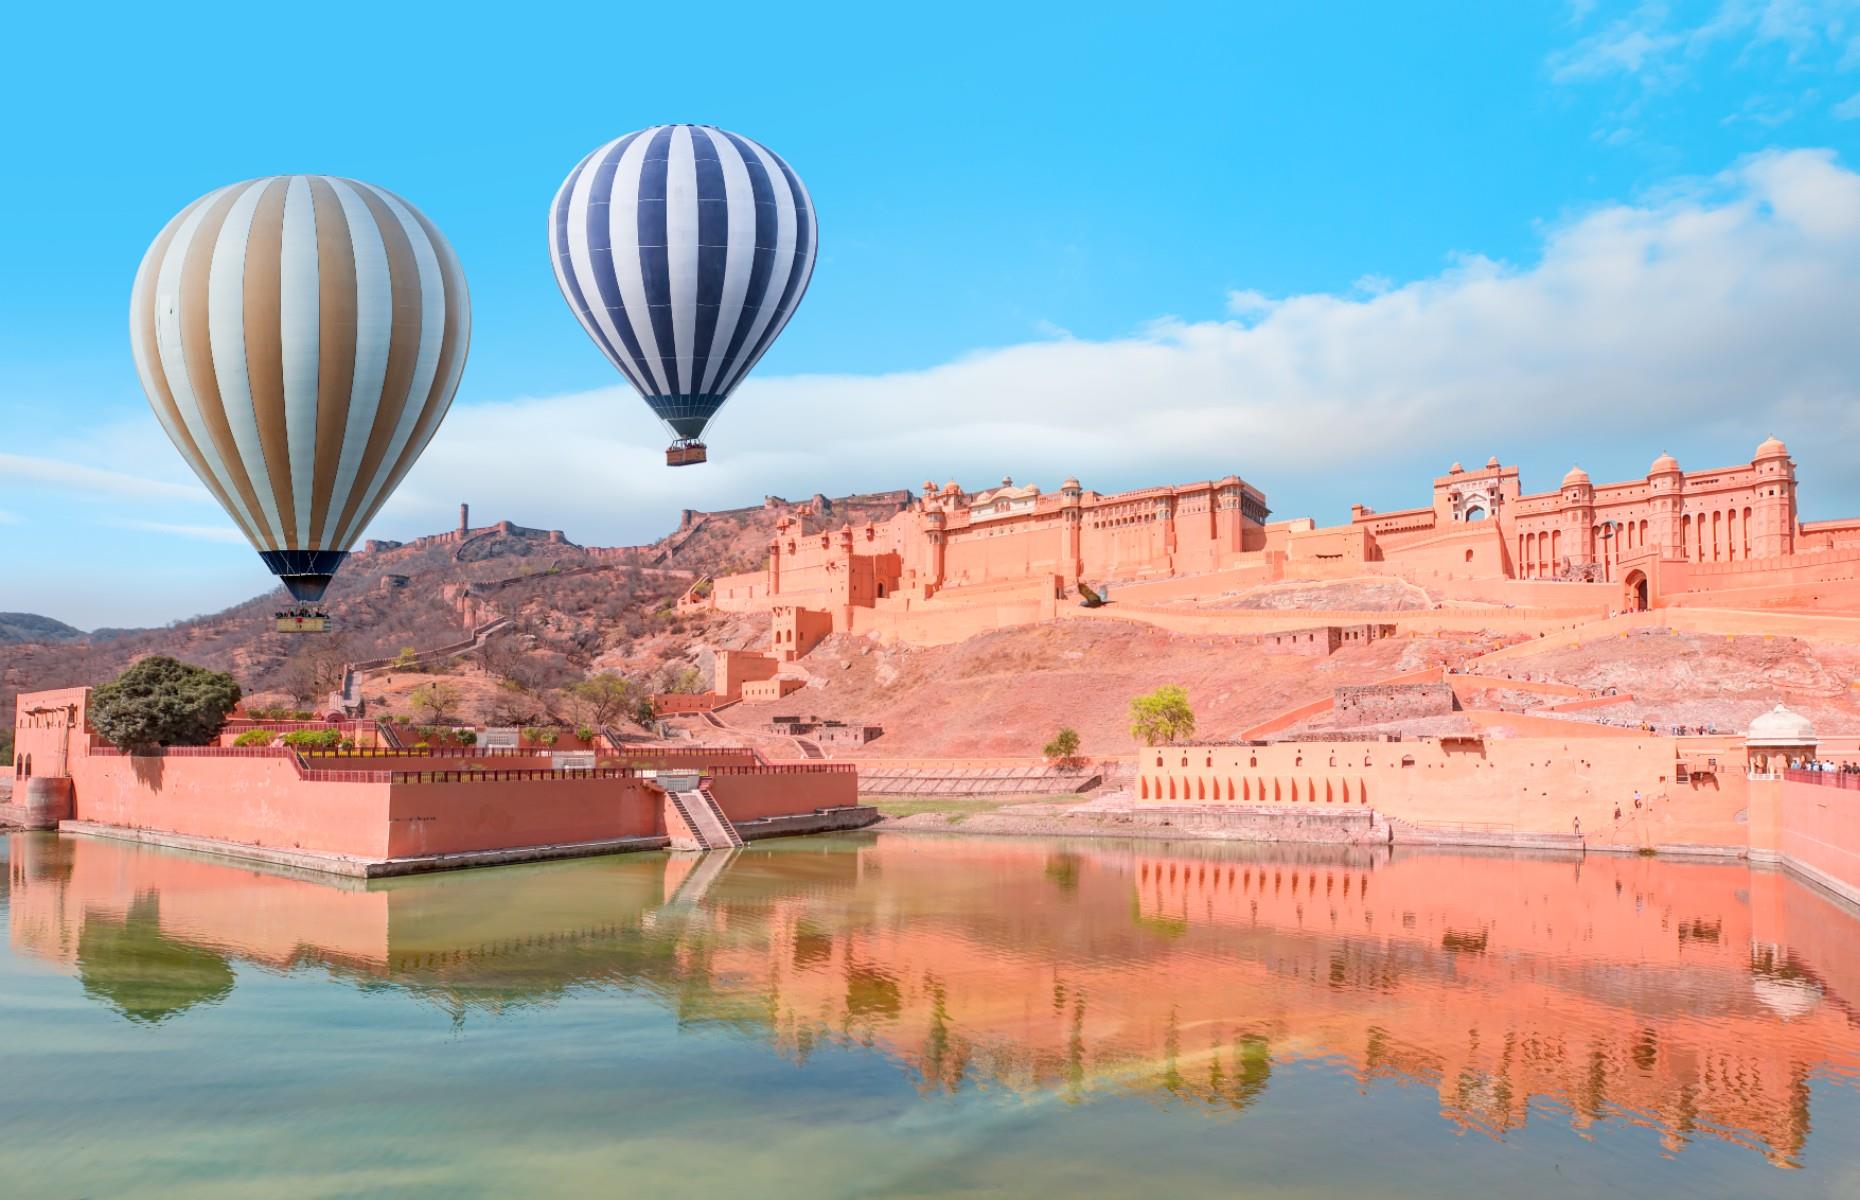 <p>See the sprawl of one of Rajasthan's most exciting cities from above with a balloon ride over Jaipur. On <a href="https://www.intrepidtravel.com/uk/india/north-india-highlights-118308">its Northern India Highlights tour</a>, Intrepid offers the opportunity to gaze down at the spectacular forts and palaces of the Pink City – named for its pink-hued sandstone buildings – from the peaceful vantage point of a hot air balloon. Starting from outside the city, you'll drift over rural villages and traditional homesteads, before reaching the impressive Amer Fort, a 16th-century structure still standing up to the test of time.</p>